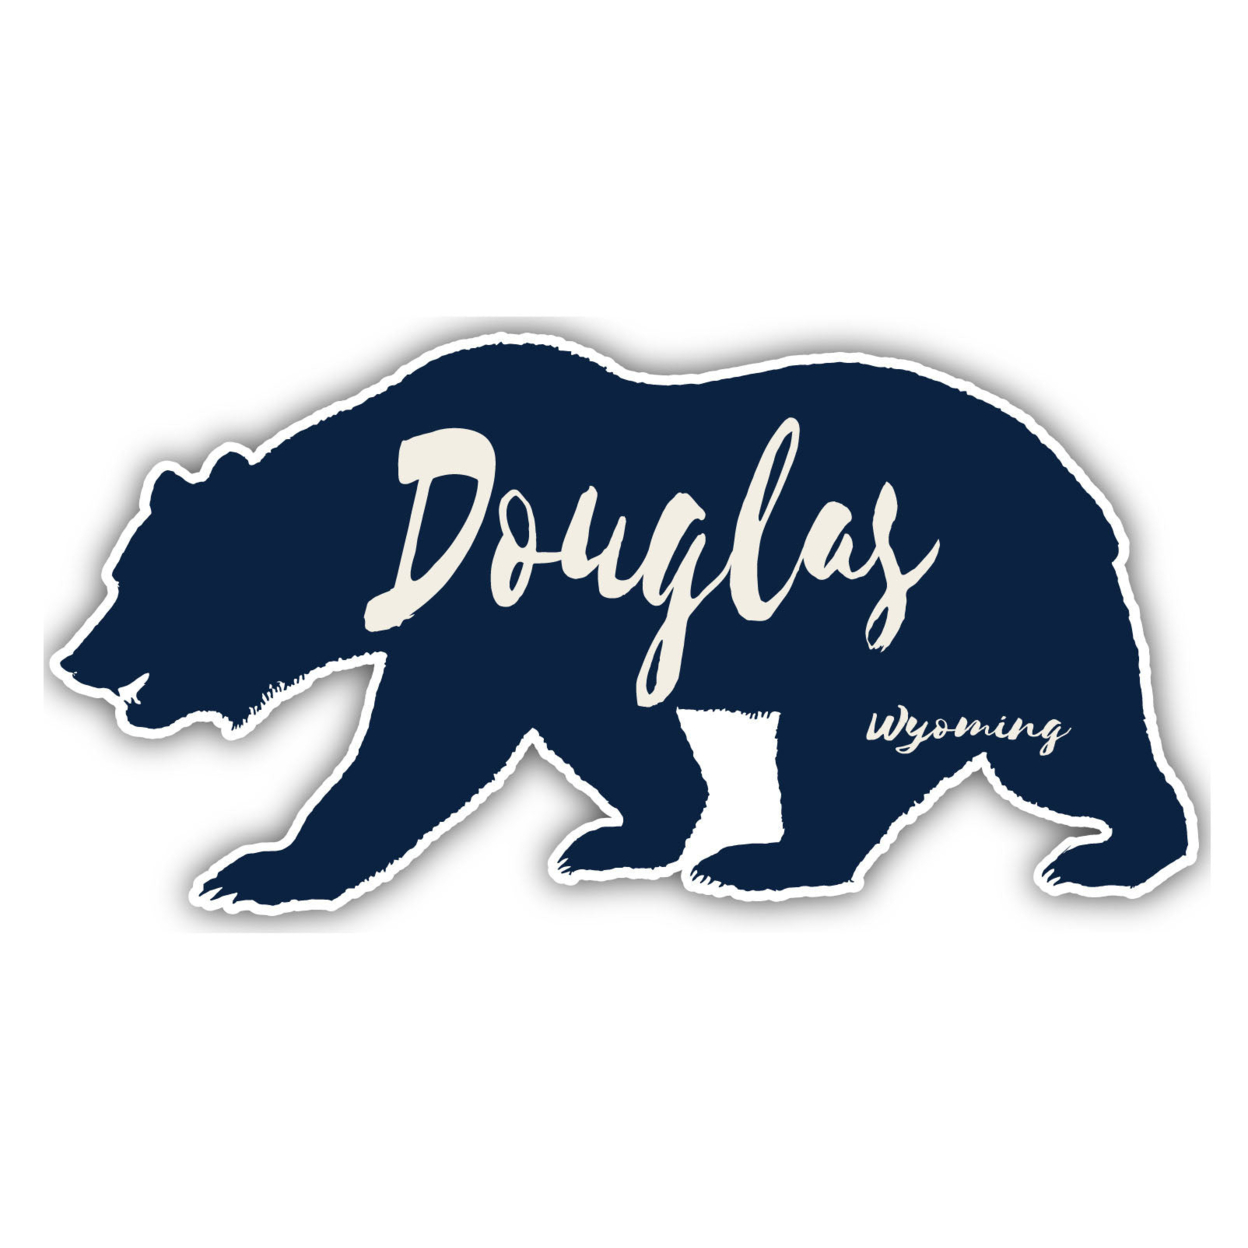 Douglas Wyoming Souvenir Decorative Stickers (Choose Theme And Size) - Single Unit, 4-Inch, Great Outdoors